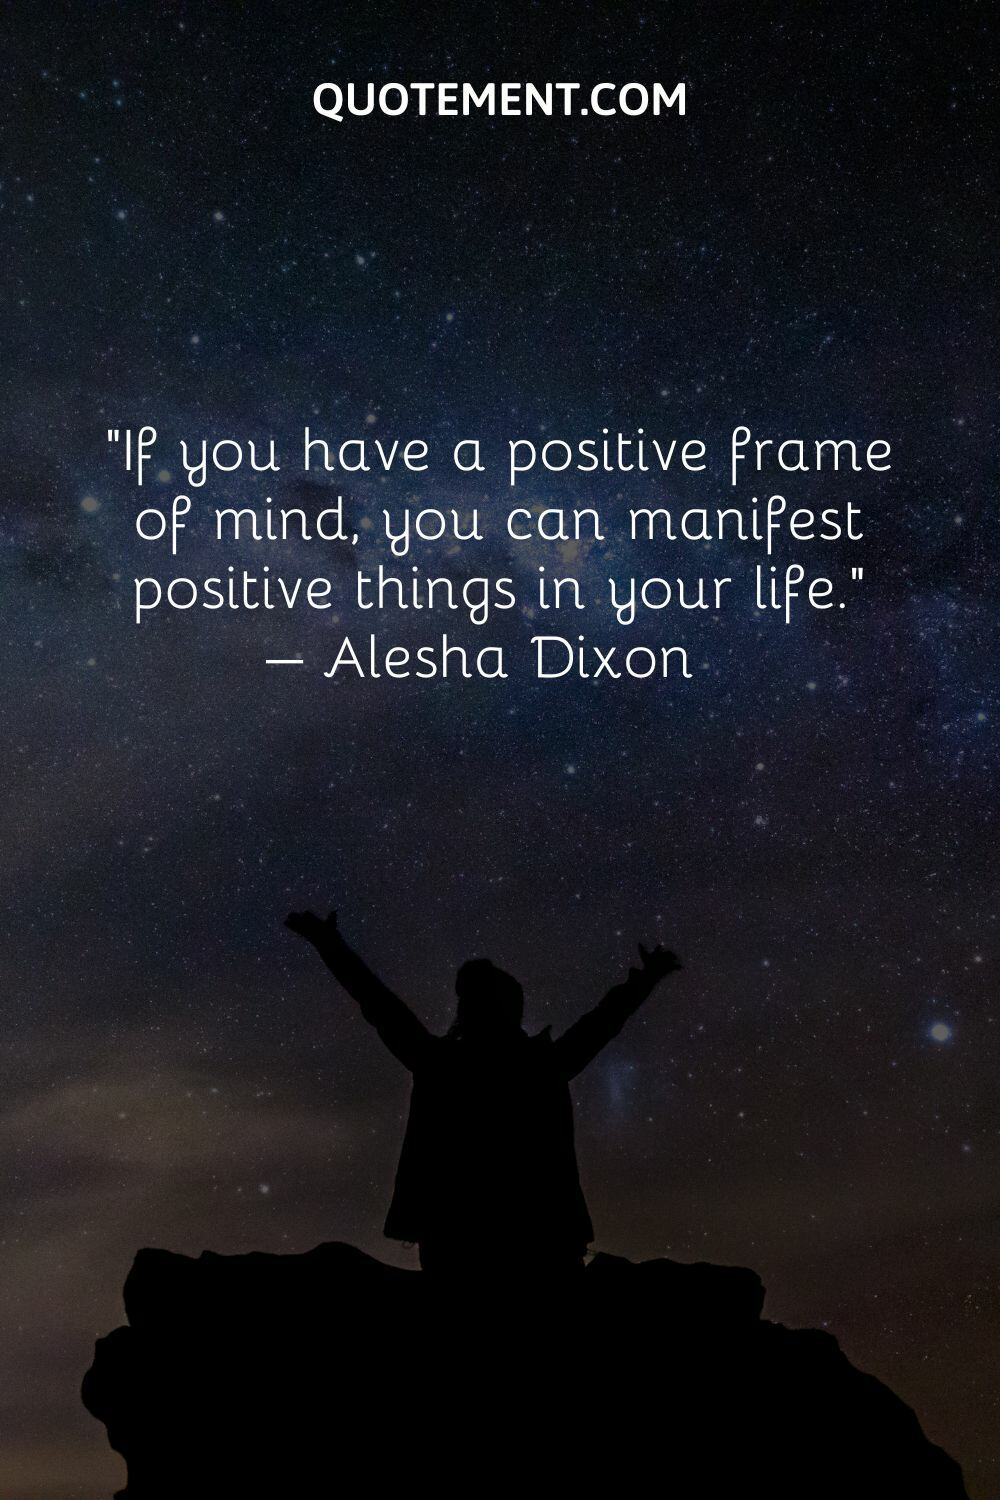 If you have a positive frame of mind, you can manifest positive things in your life